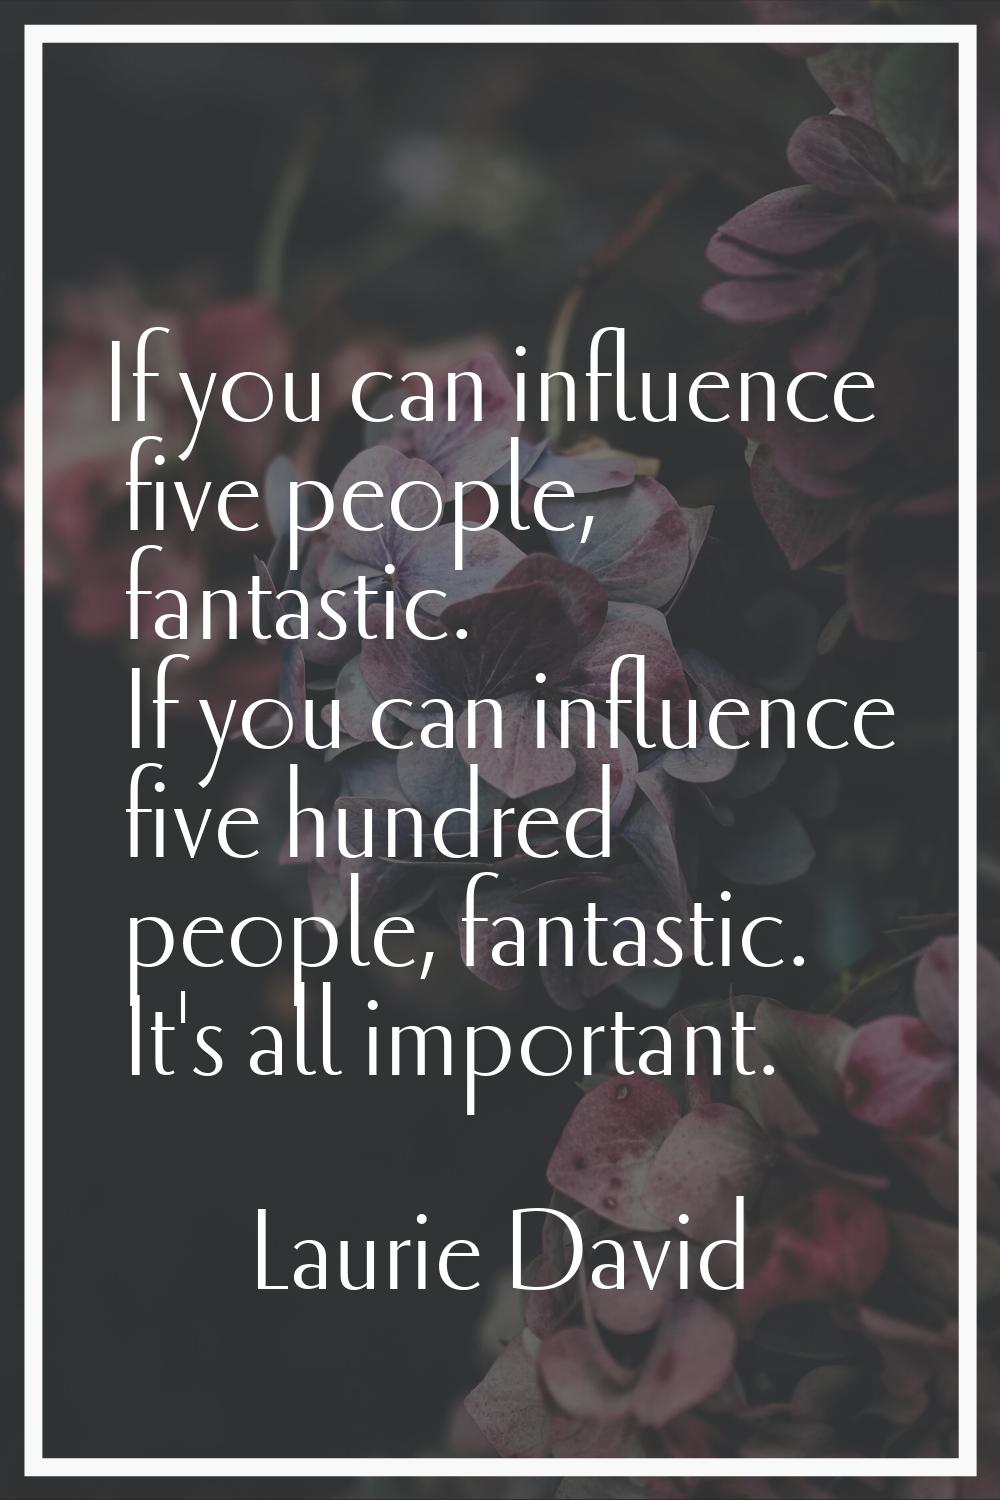 If you can influence five people, fantastic. If you can influence five hundred people, fantastic. I